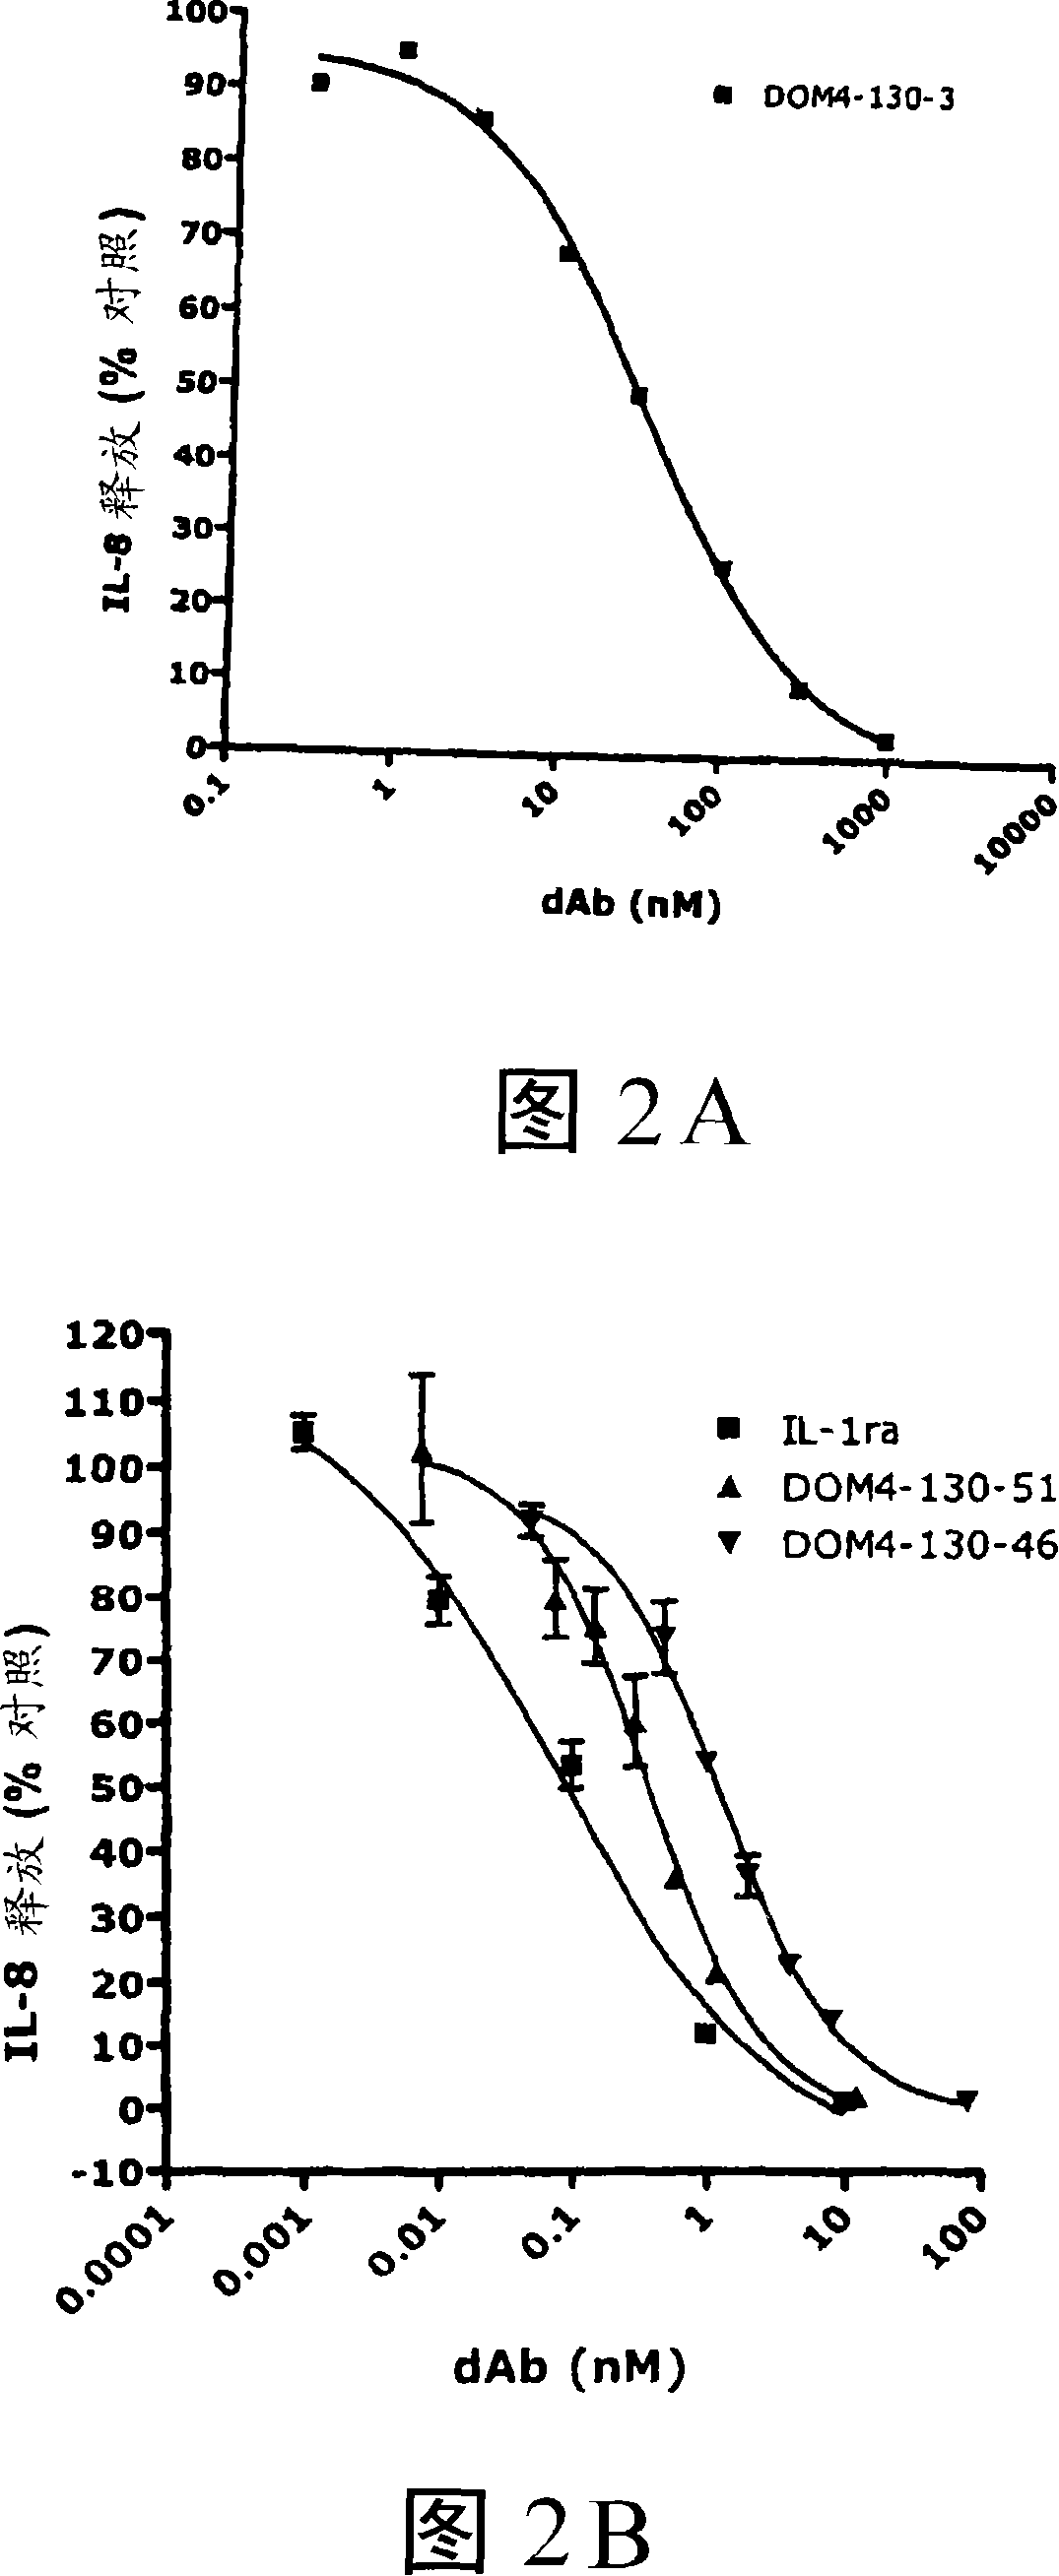 Anti-il-1r1 single domain antibodies and therapeutic uses